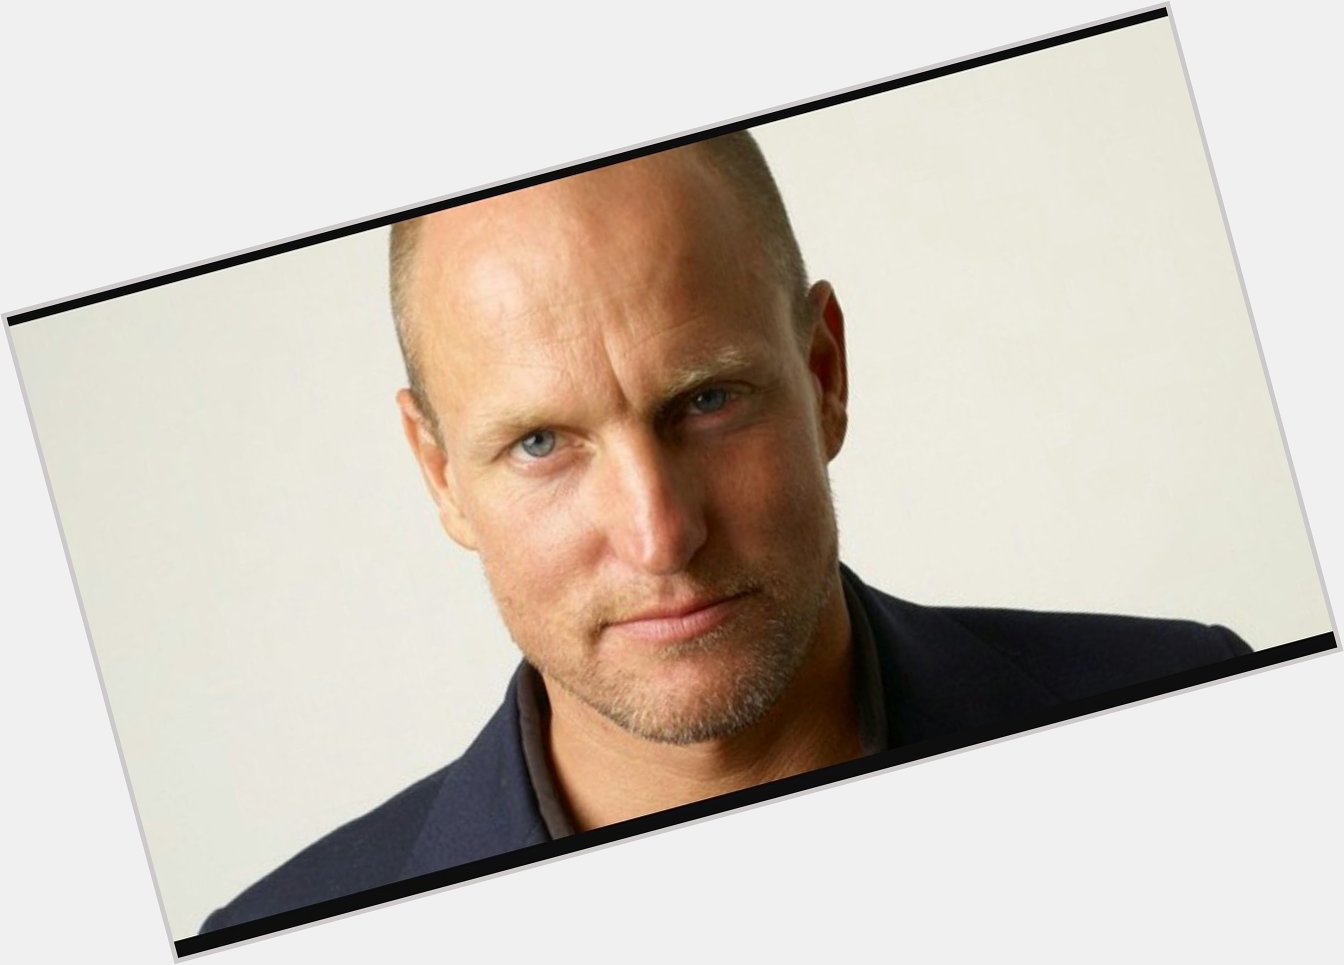 The Docs wanna wish a happy birthday to one of our favorite versatile performers, Woody Harrelson 